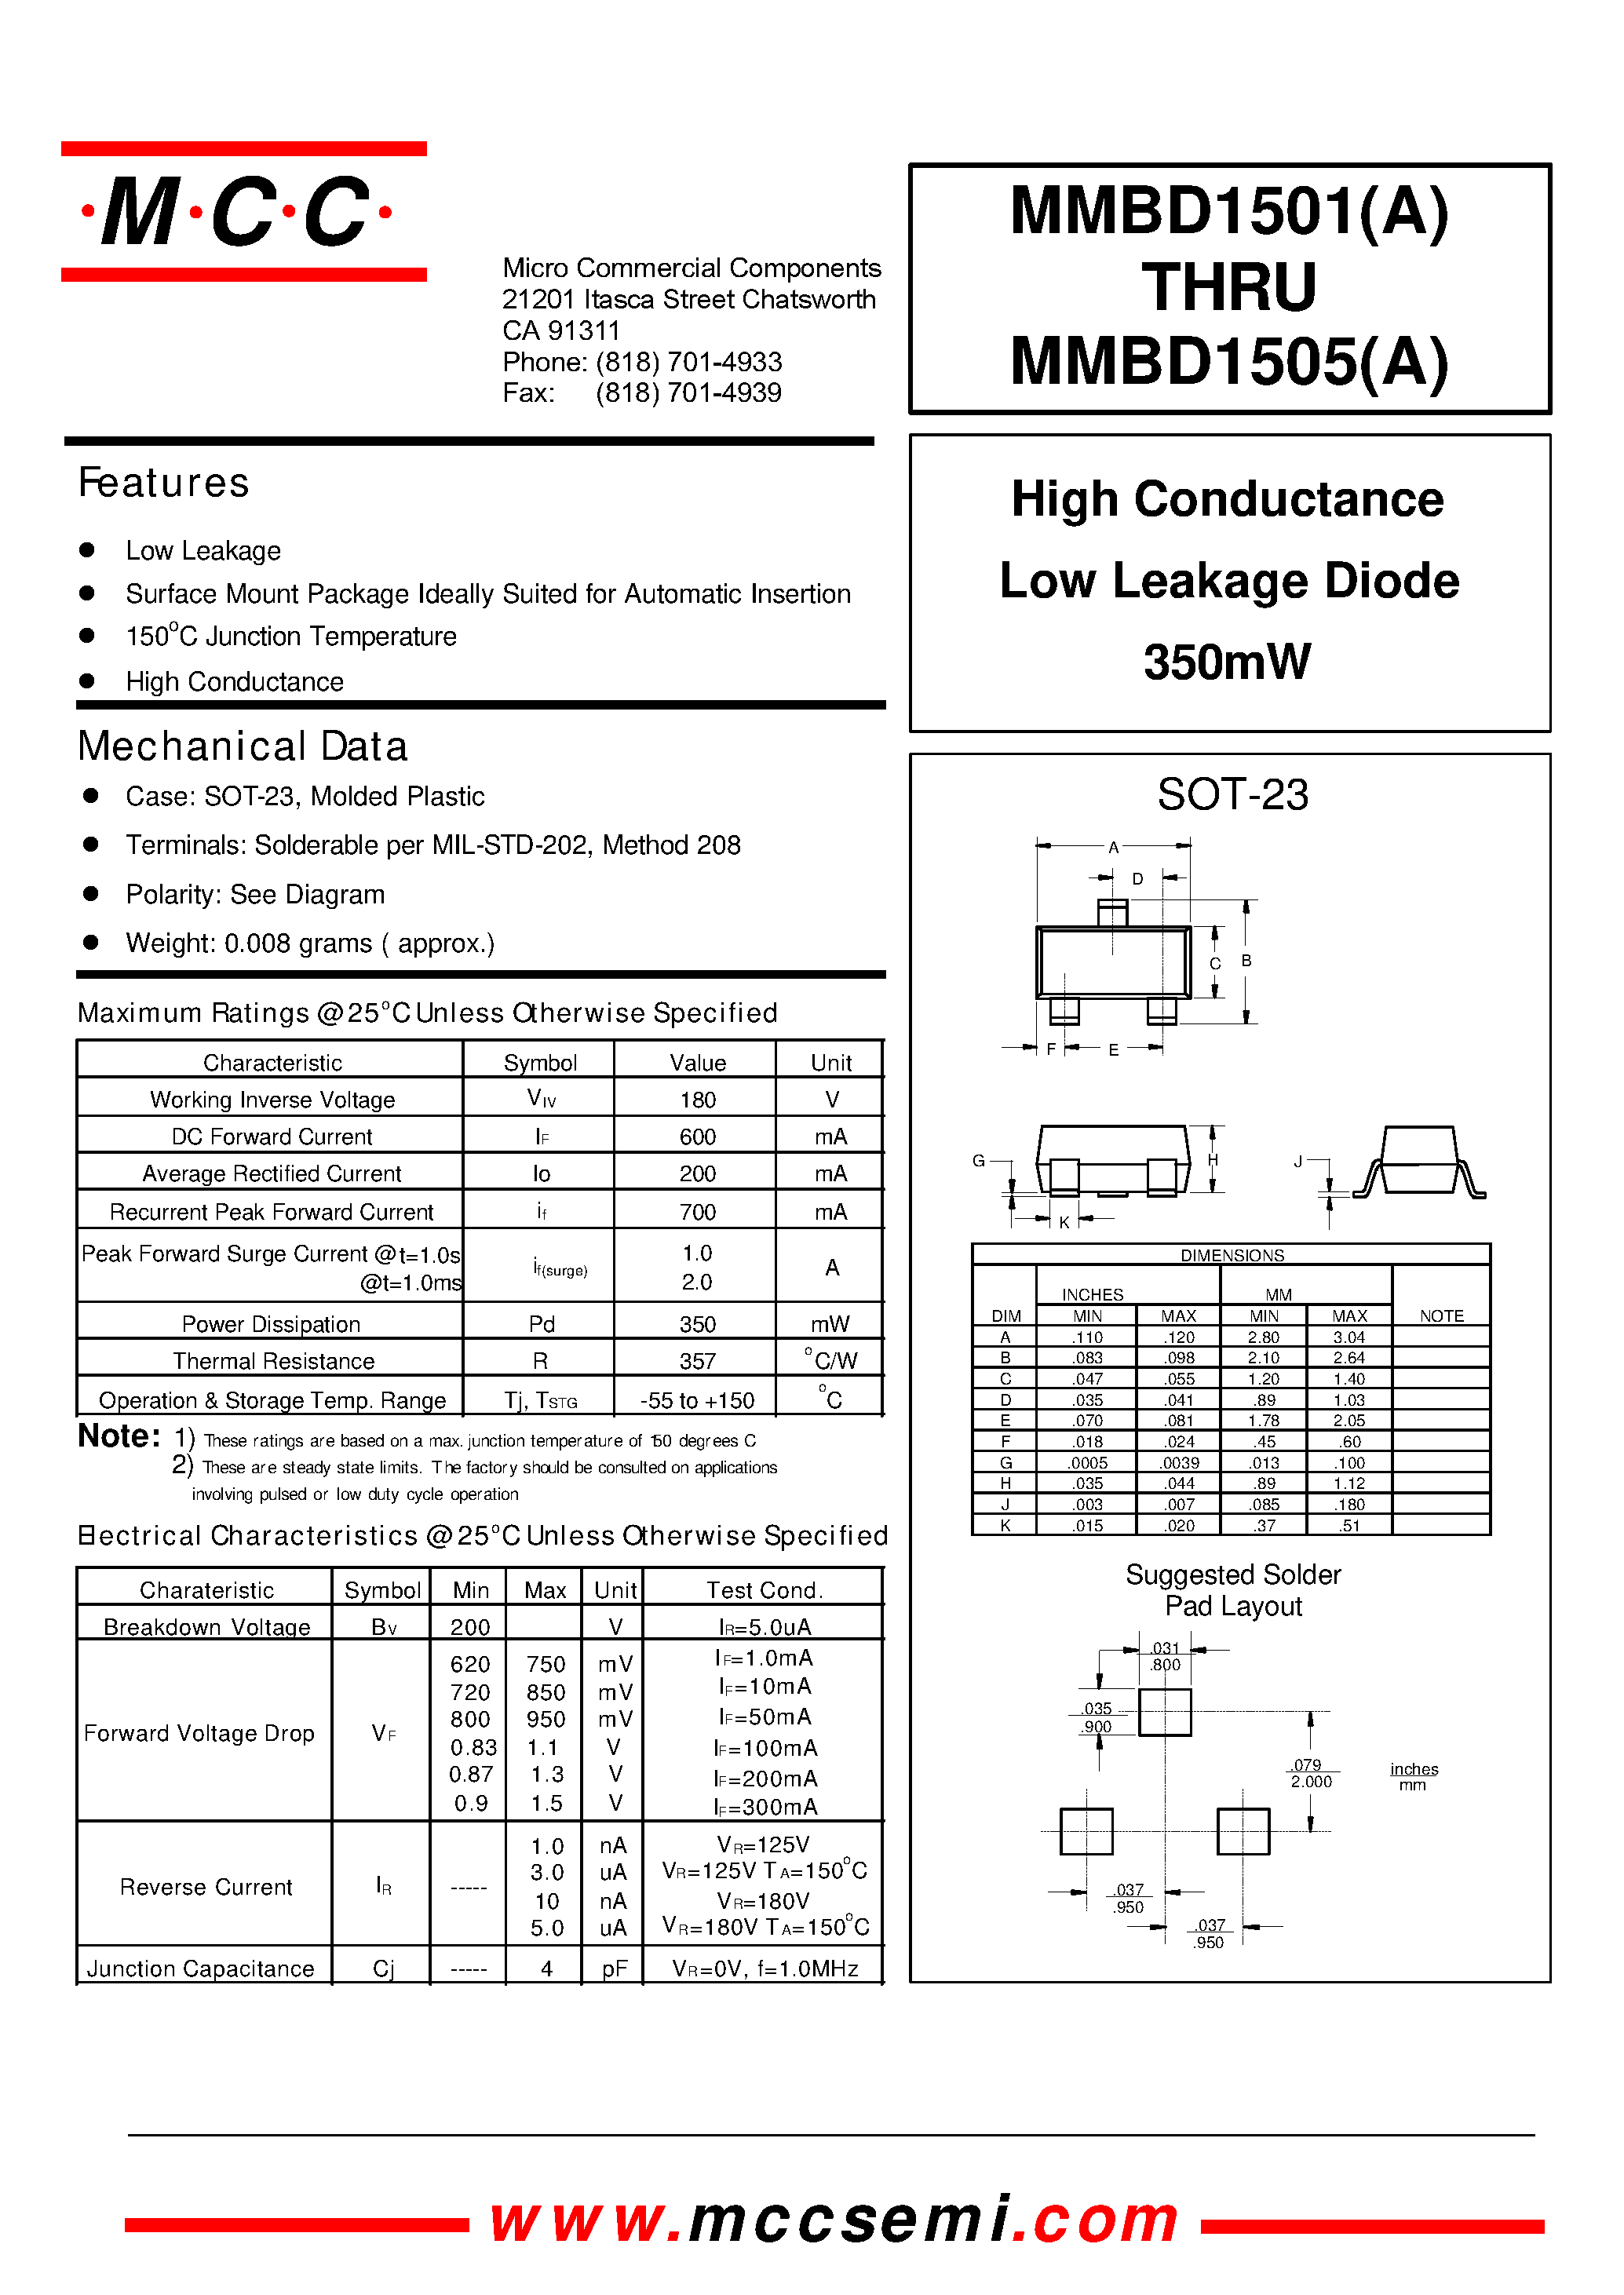 Даташит MMBD1501A - High Conductance Low Leakage Diode 350mW страница 1